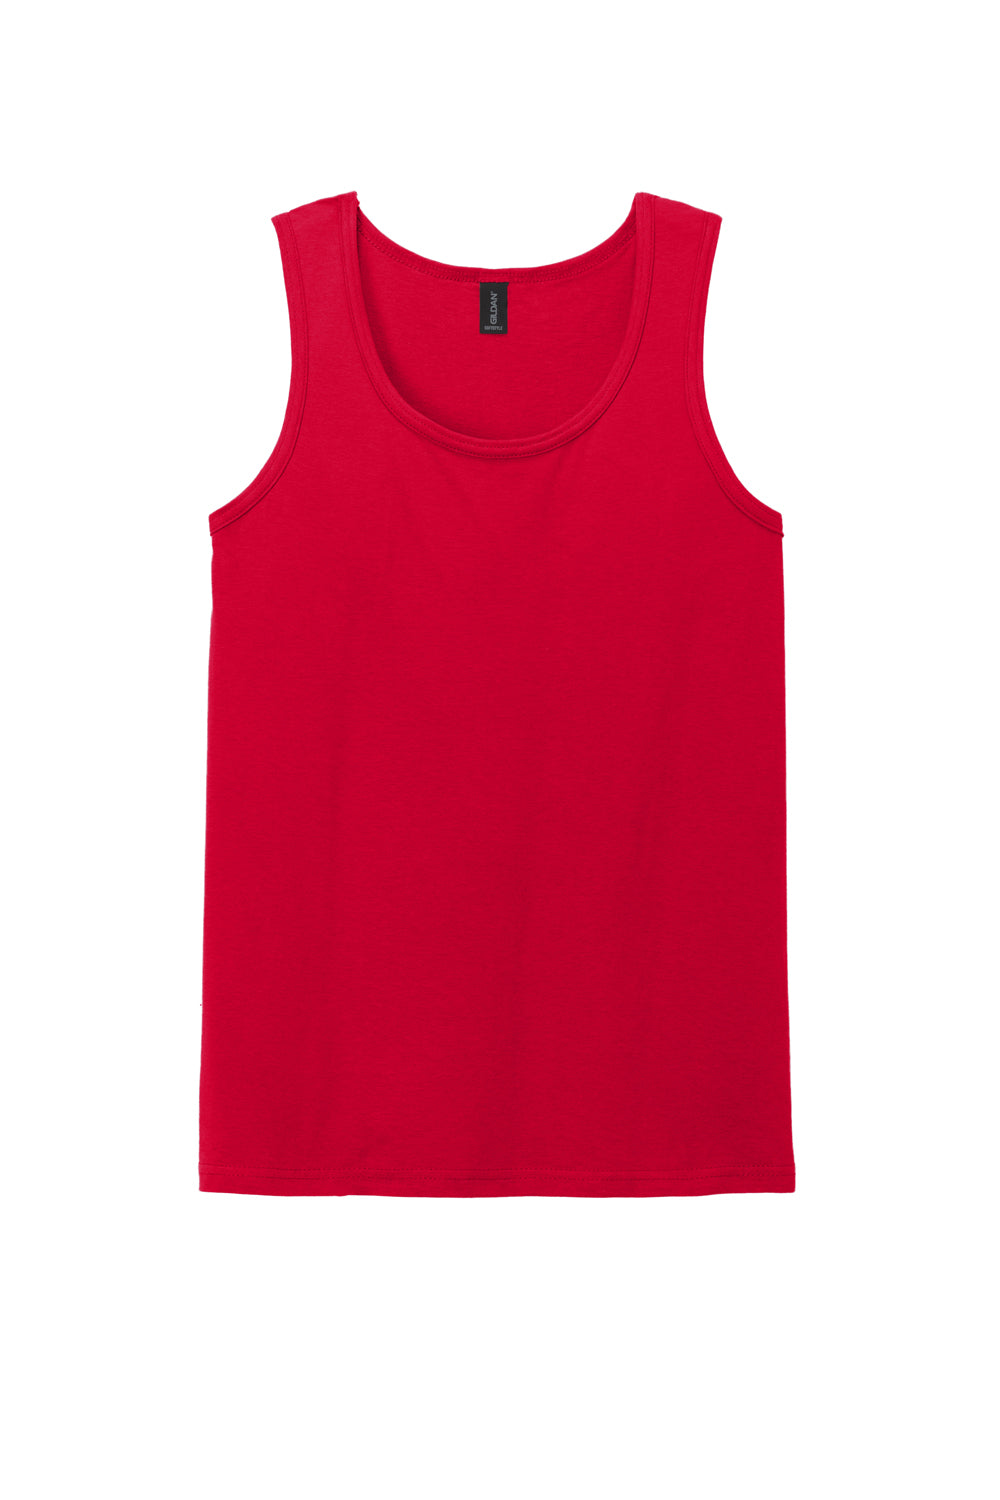 Gildan Mens Softstyle Tank Top Red Flat Front